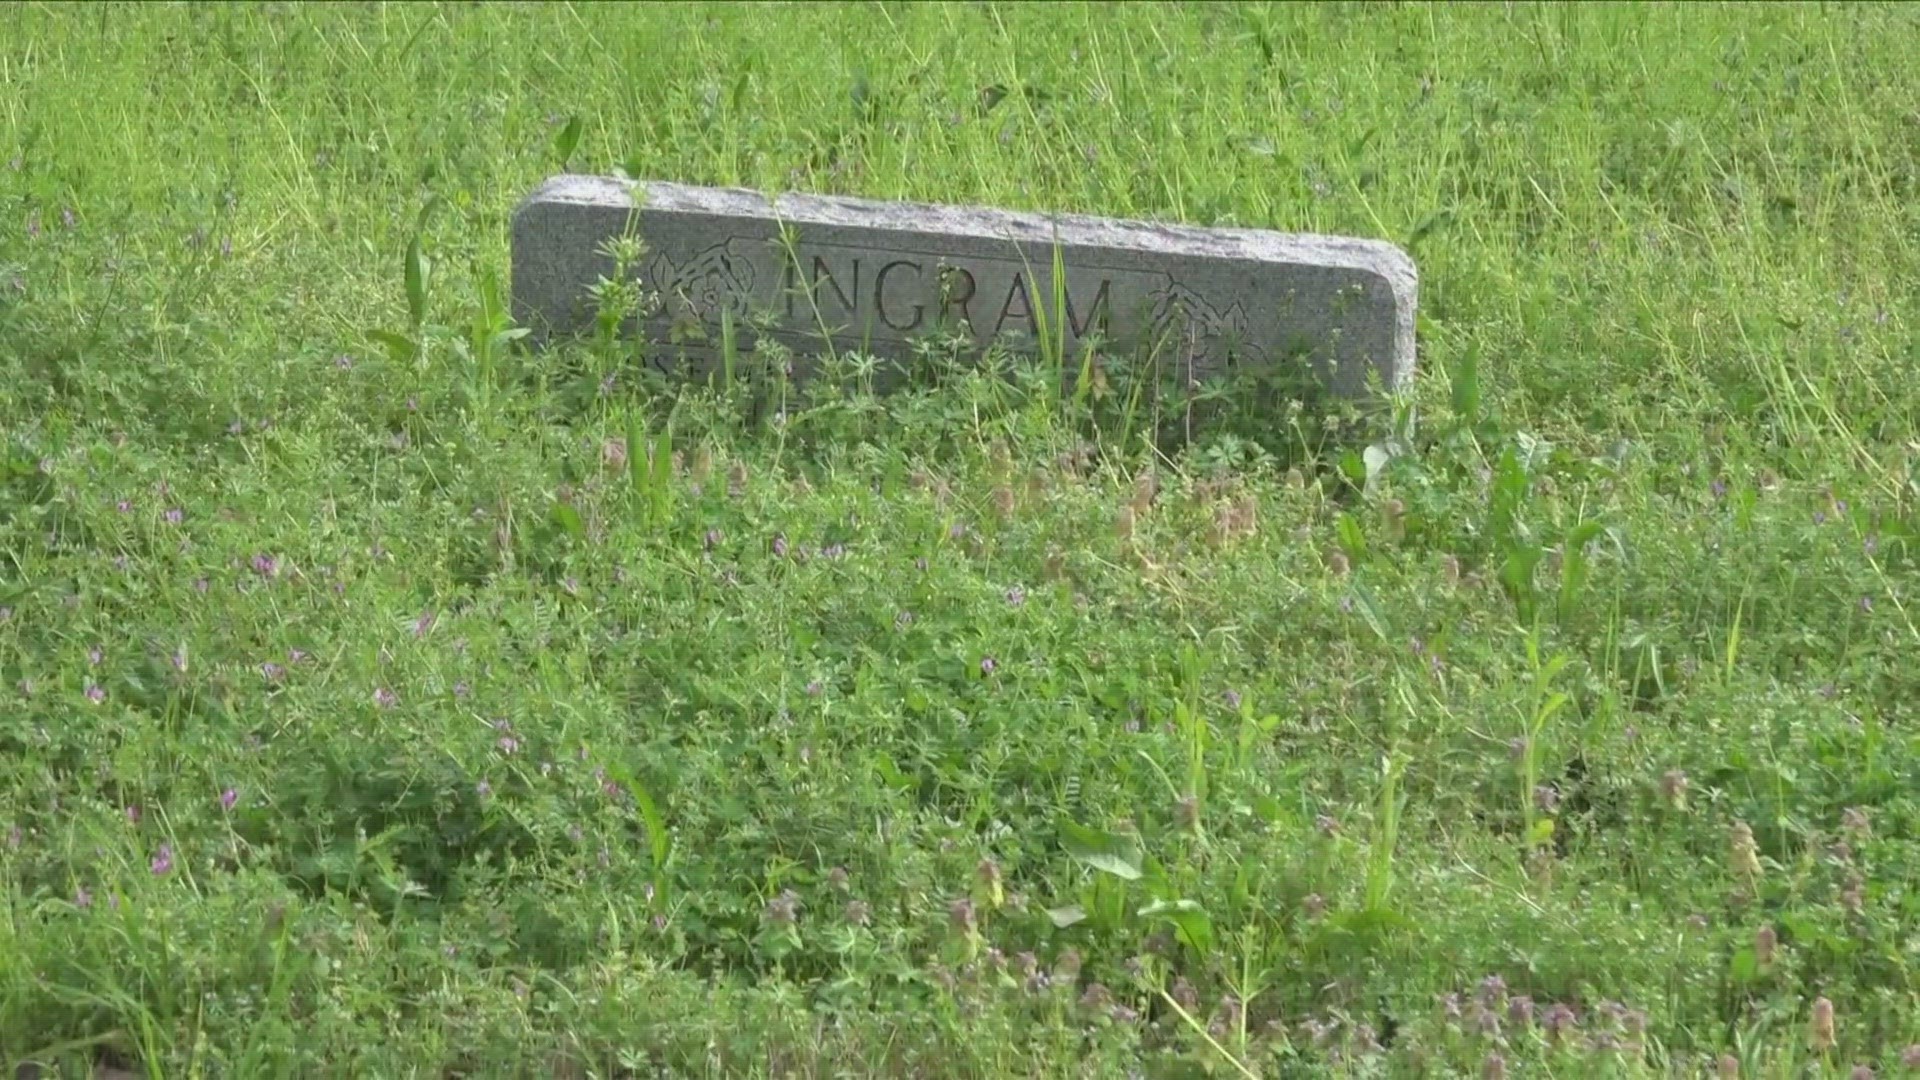 Hundreds of people have been buried at the Mount Carmel Hollywood Cemetery, yet you can only see about a quarter of the headstones due to overgrown grass.